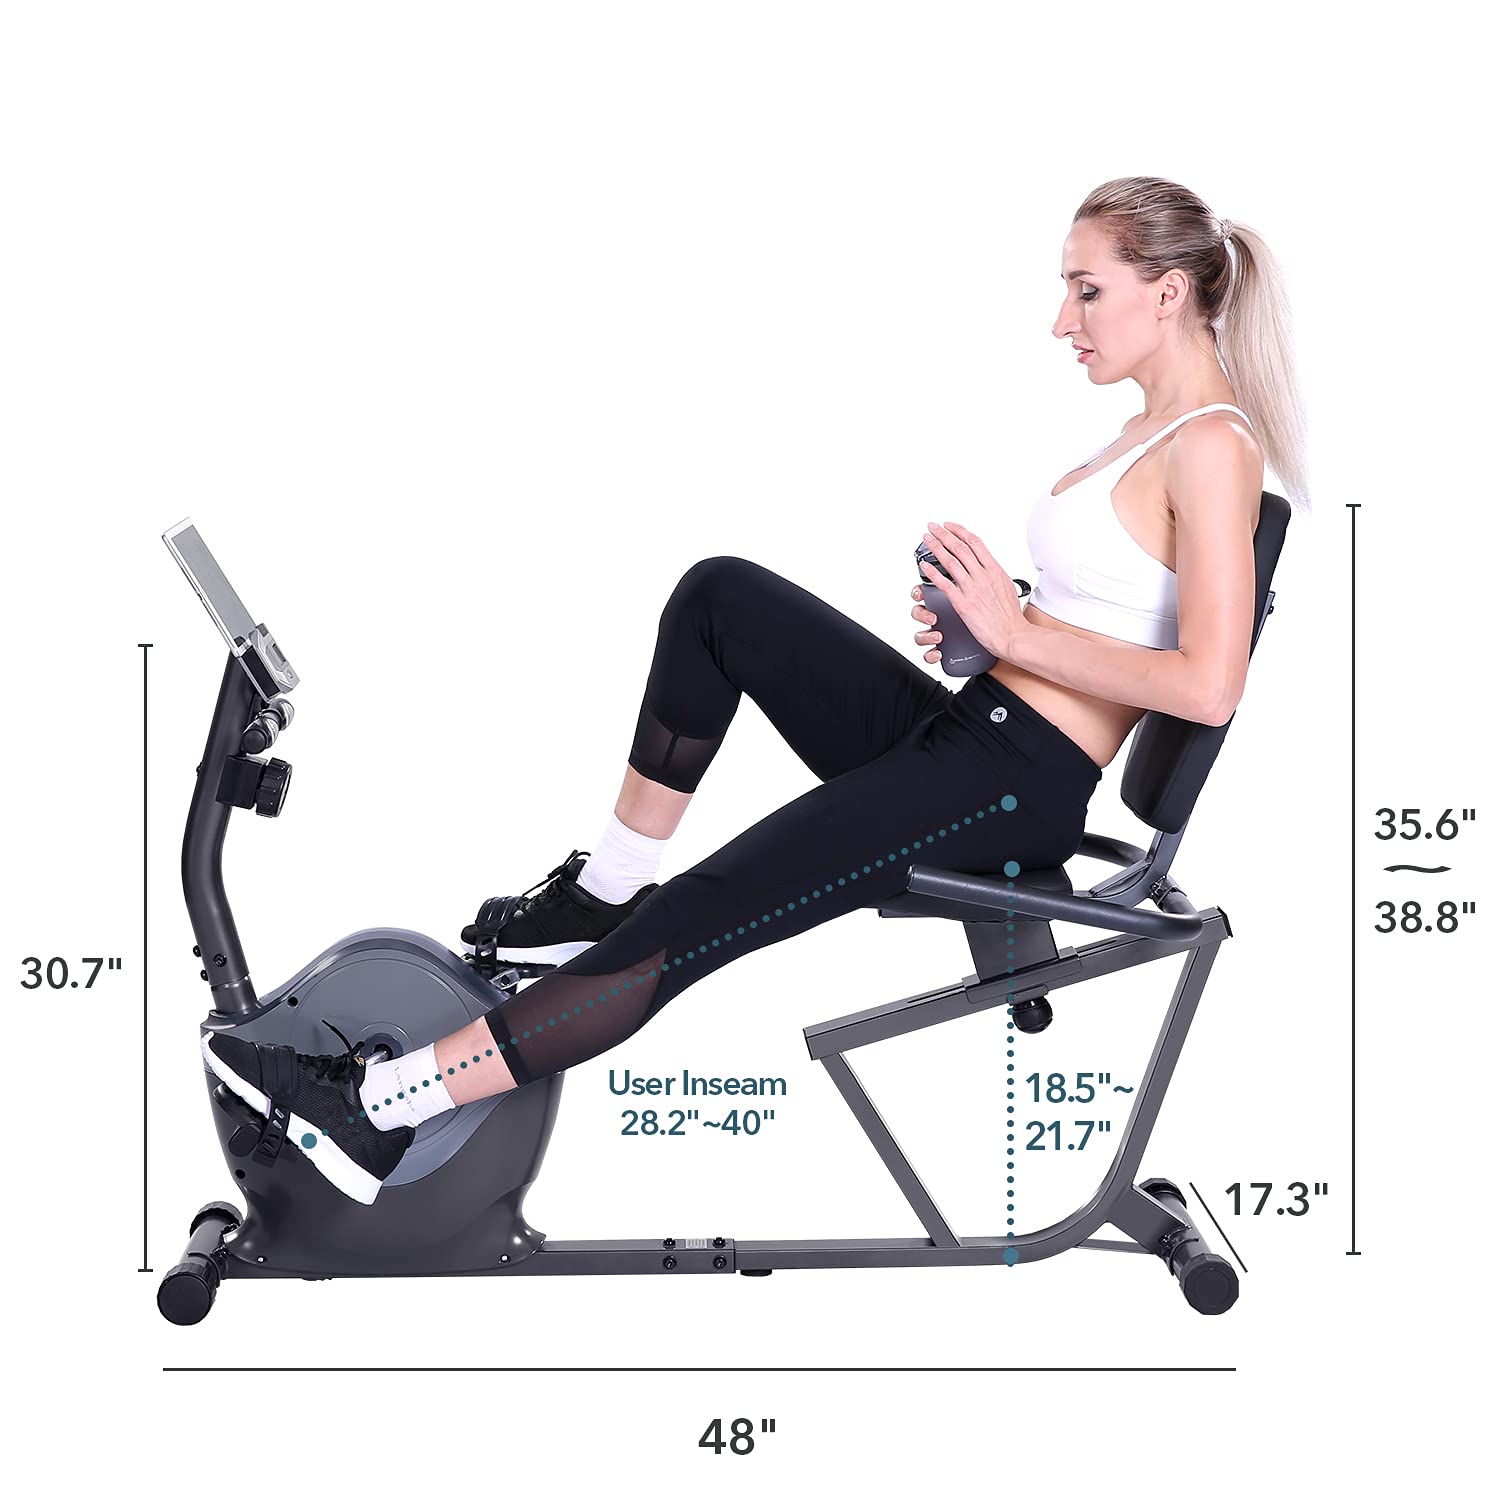 Load image into Gallery viewer, Magnetic Recumbent Exercise Bike for Adults Seniors -Pulse Rate Monitoring, 300 lb Capacity, phone holder and Quick Adjustable Seat- Indoor Magnetic Cycling Fitness Equipment for Home Workout
